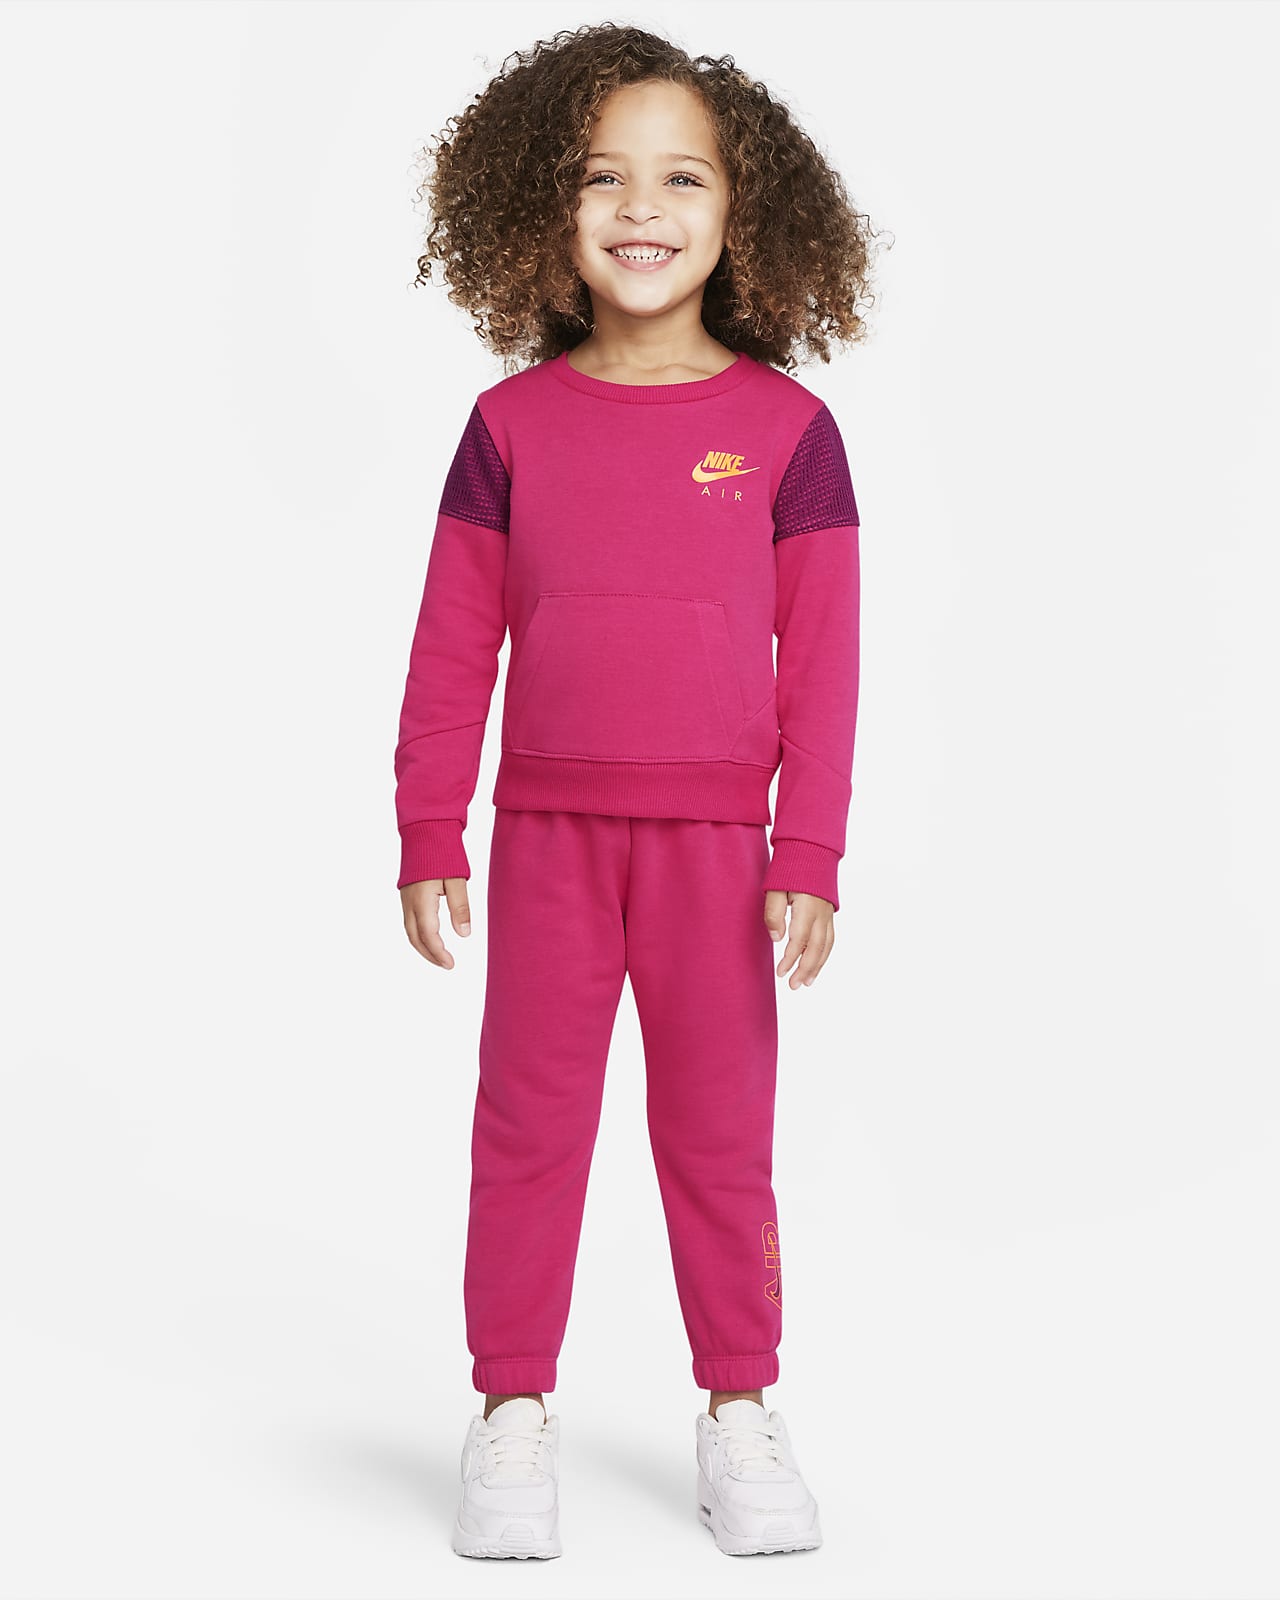 Nike Toddler Crew and Trousers Set